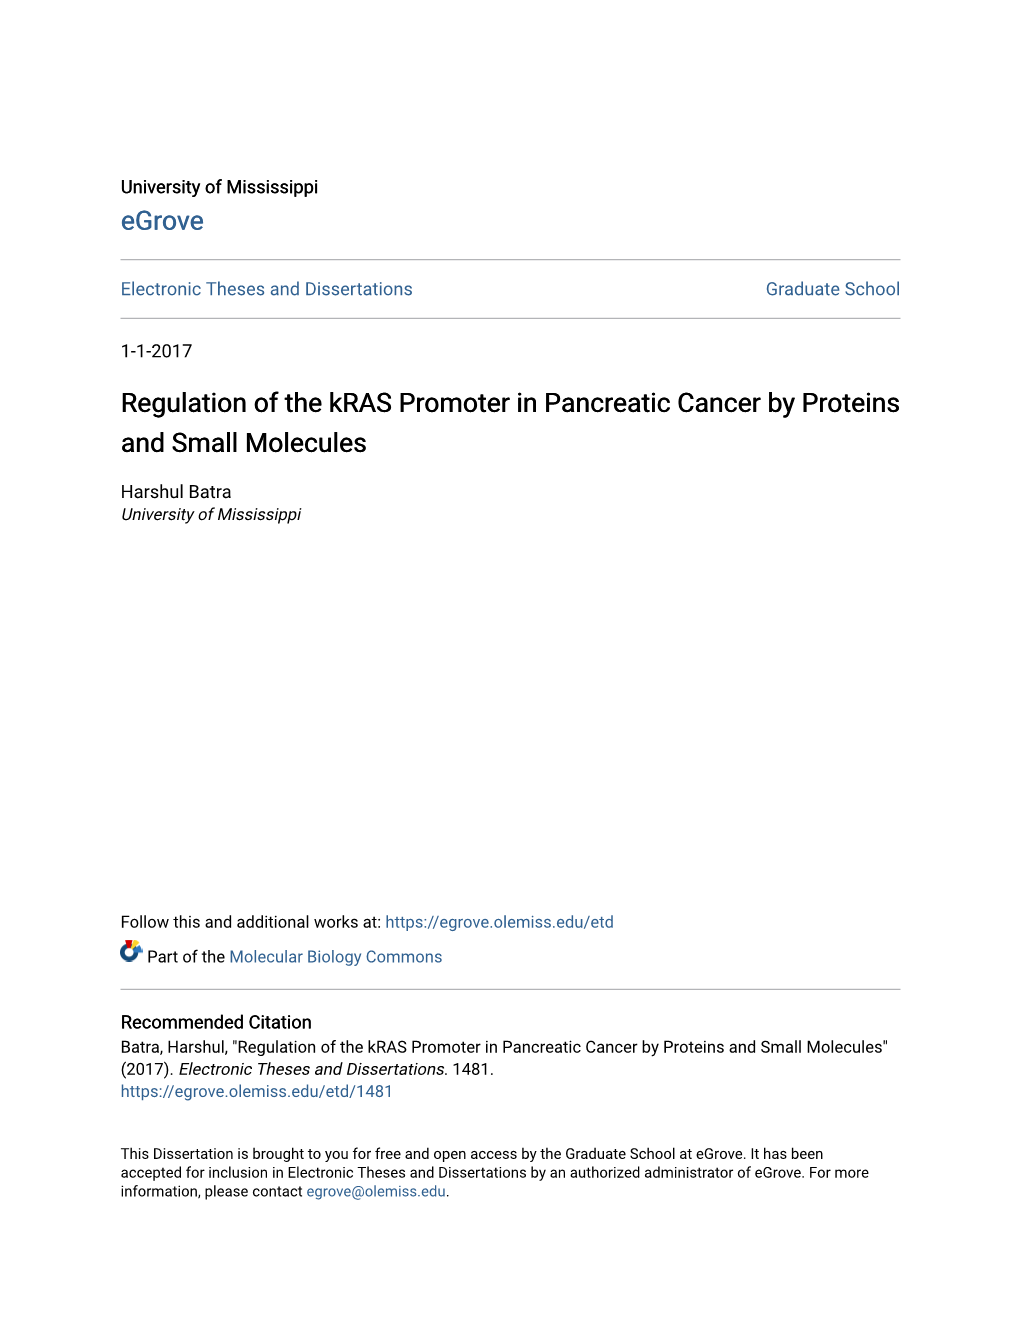 Regulation of the Kras Promoter in Pancreatic Cancer by Proteins and Small Molecules